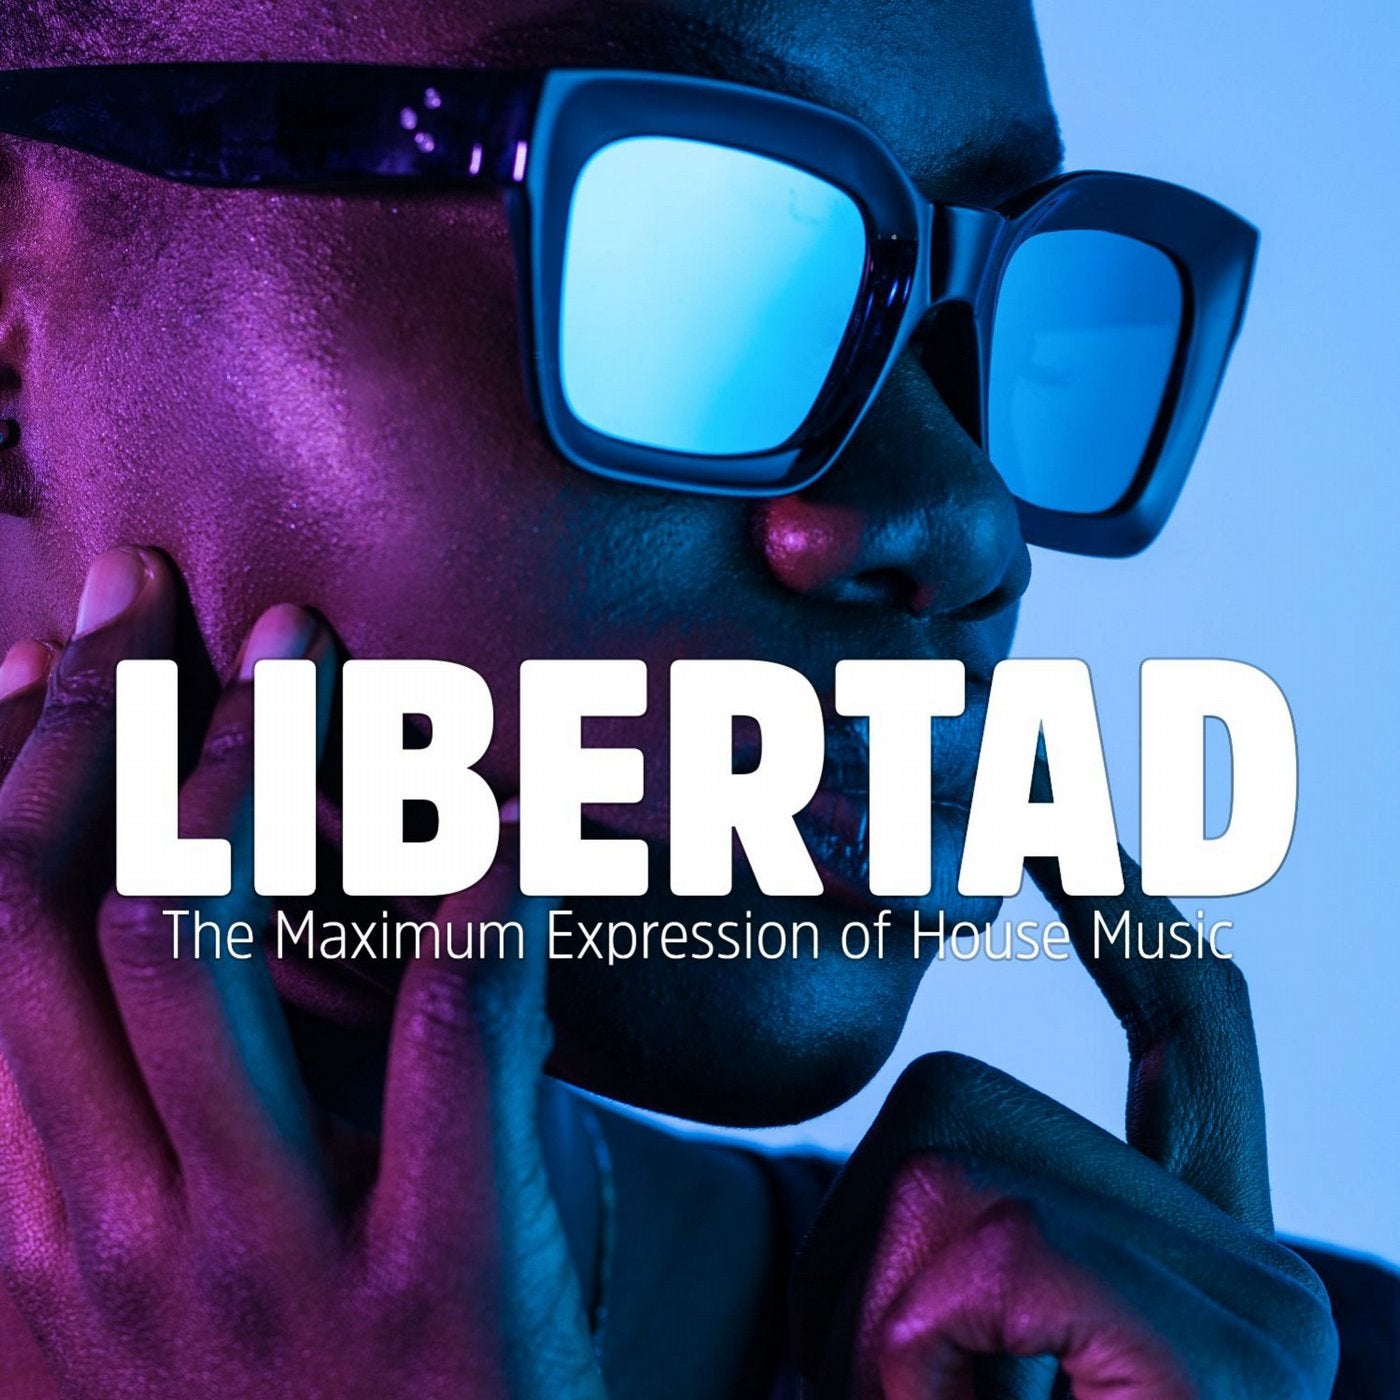 Libertad (The Maximum Expression of House Music)